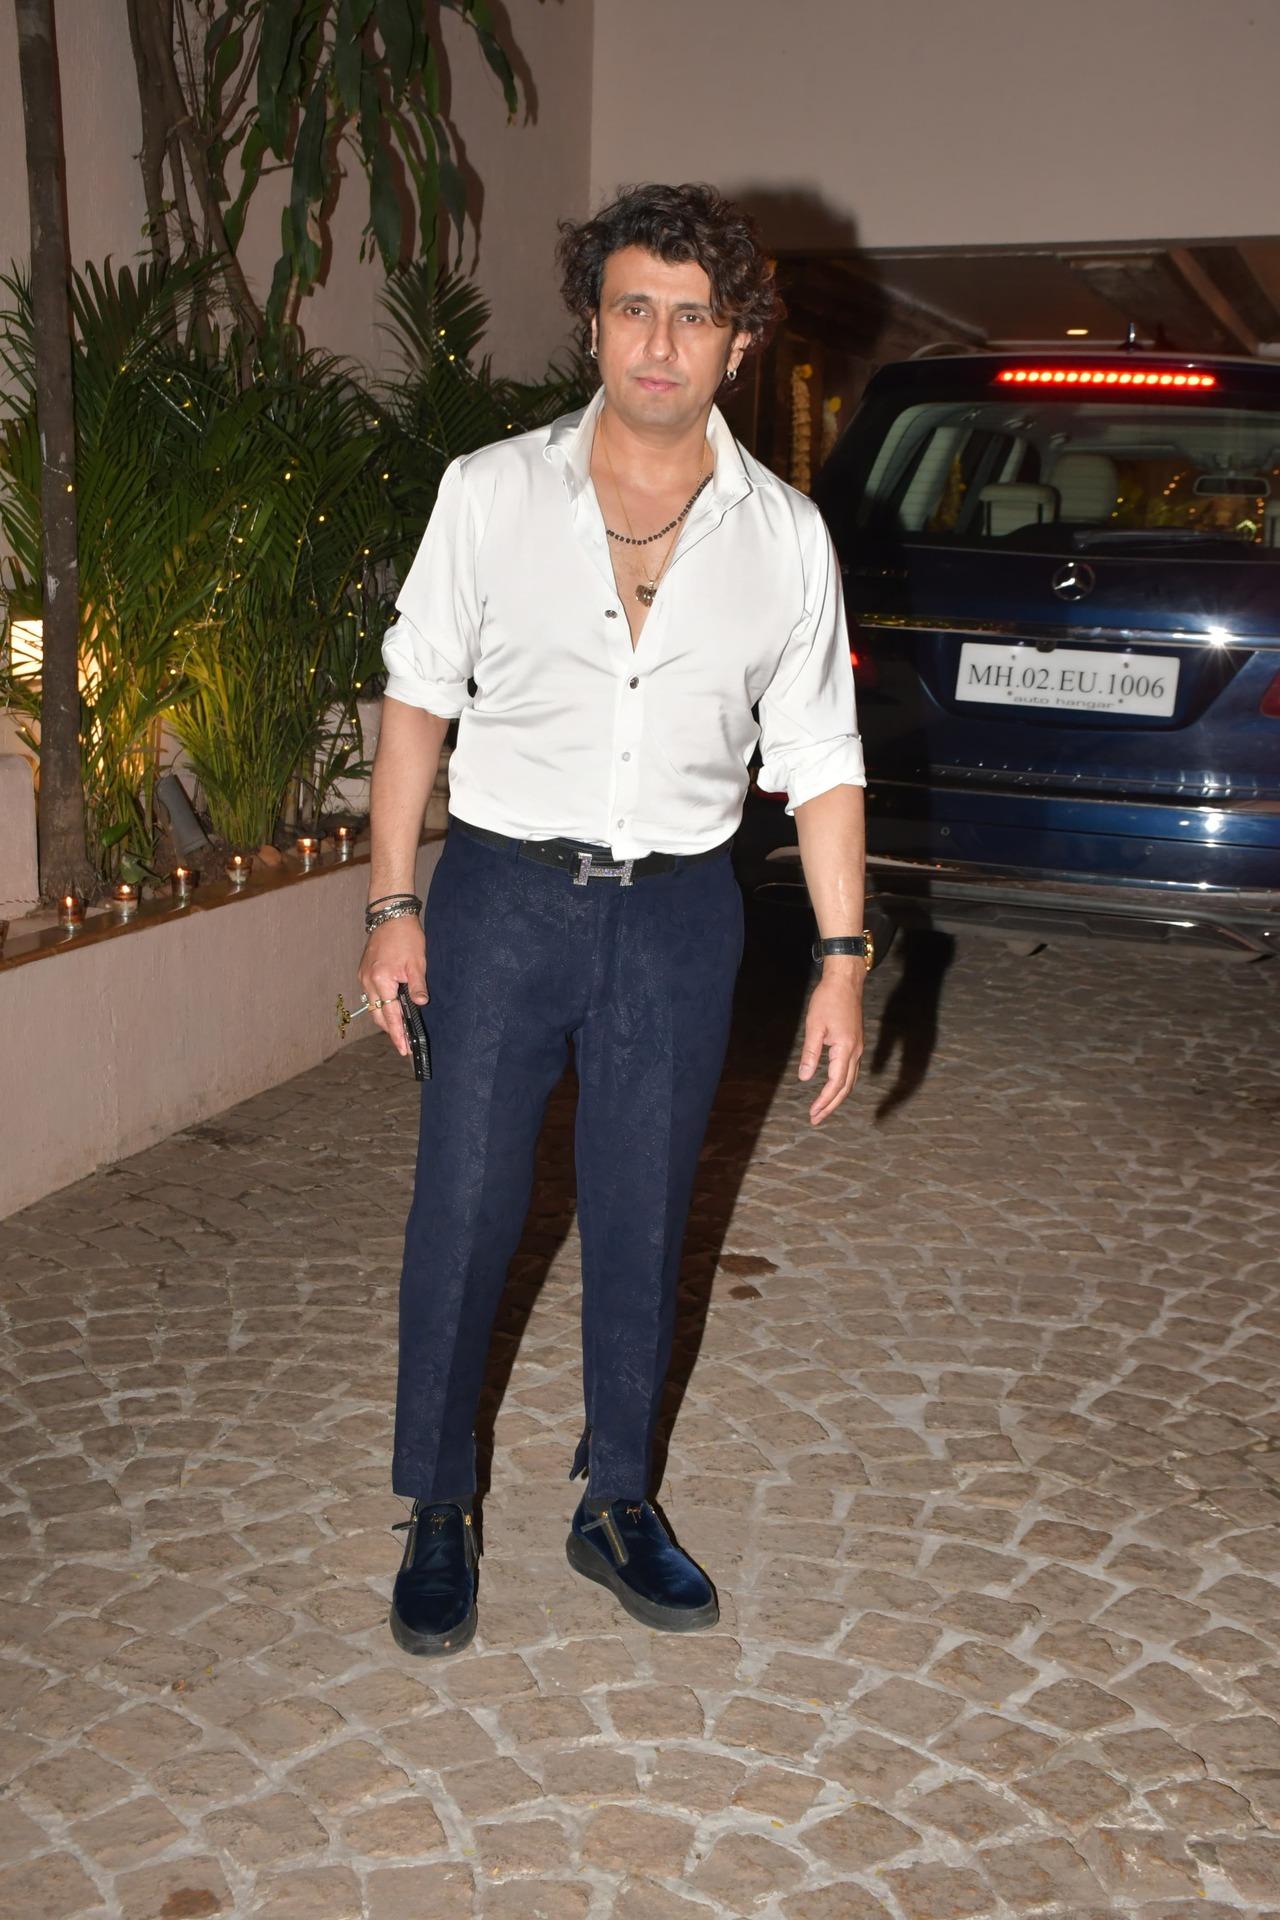 Singer Sonu Nigam looked dapper in a white shirt and blue pants as he arrived for the party